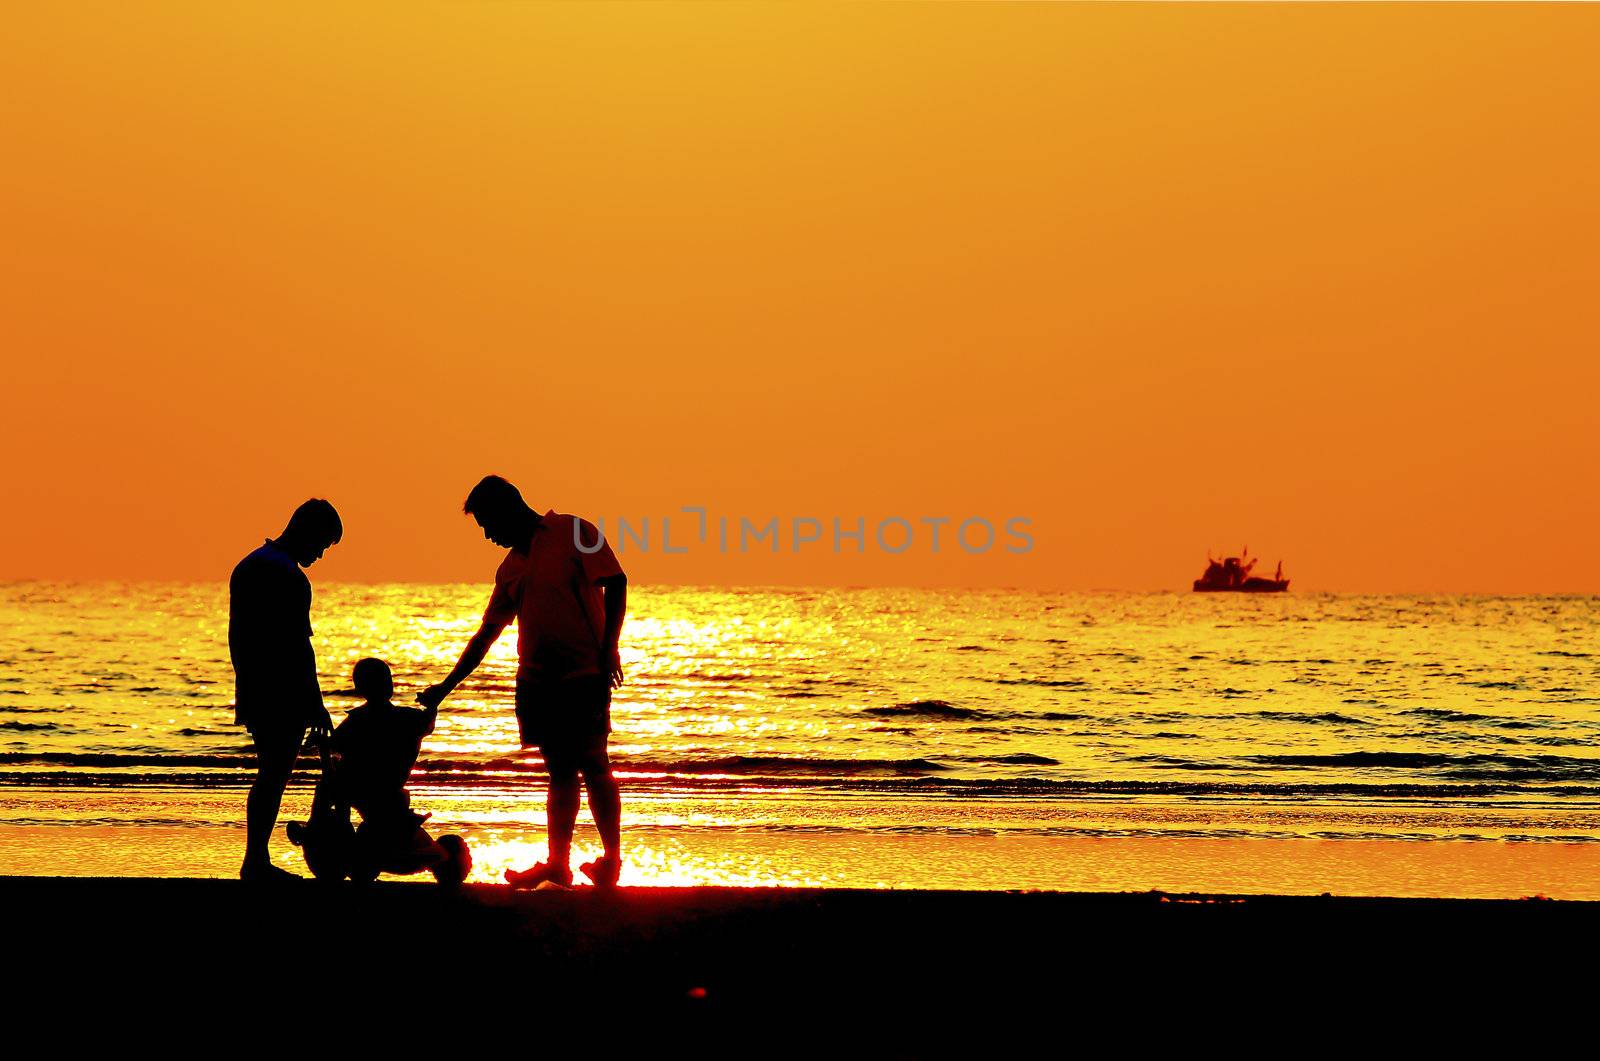 Silhouette image of father  child by the sea shore, sunset